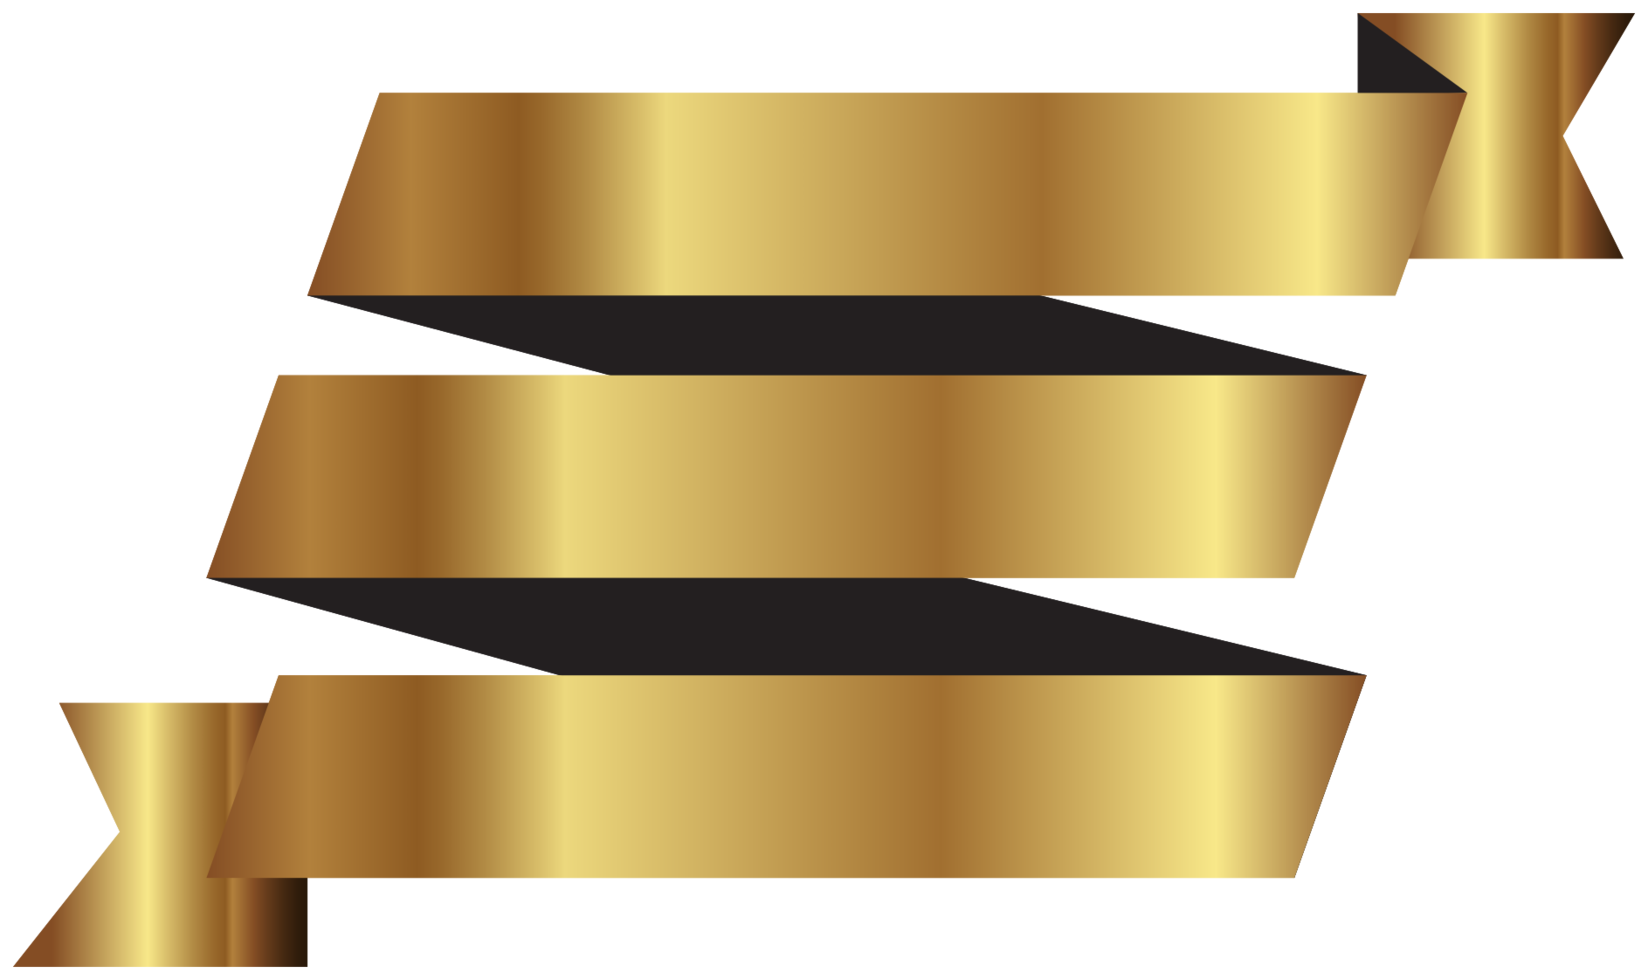 ruban d'or png